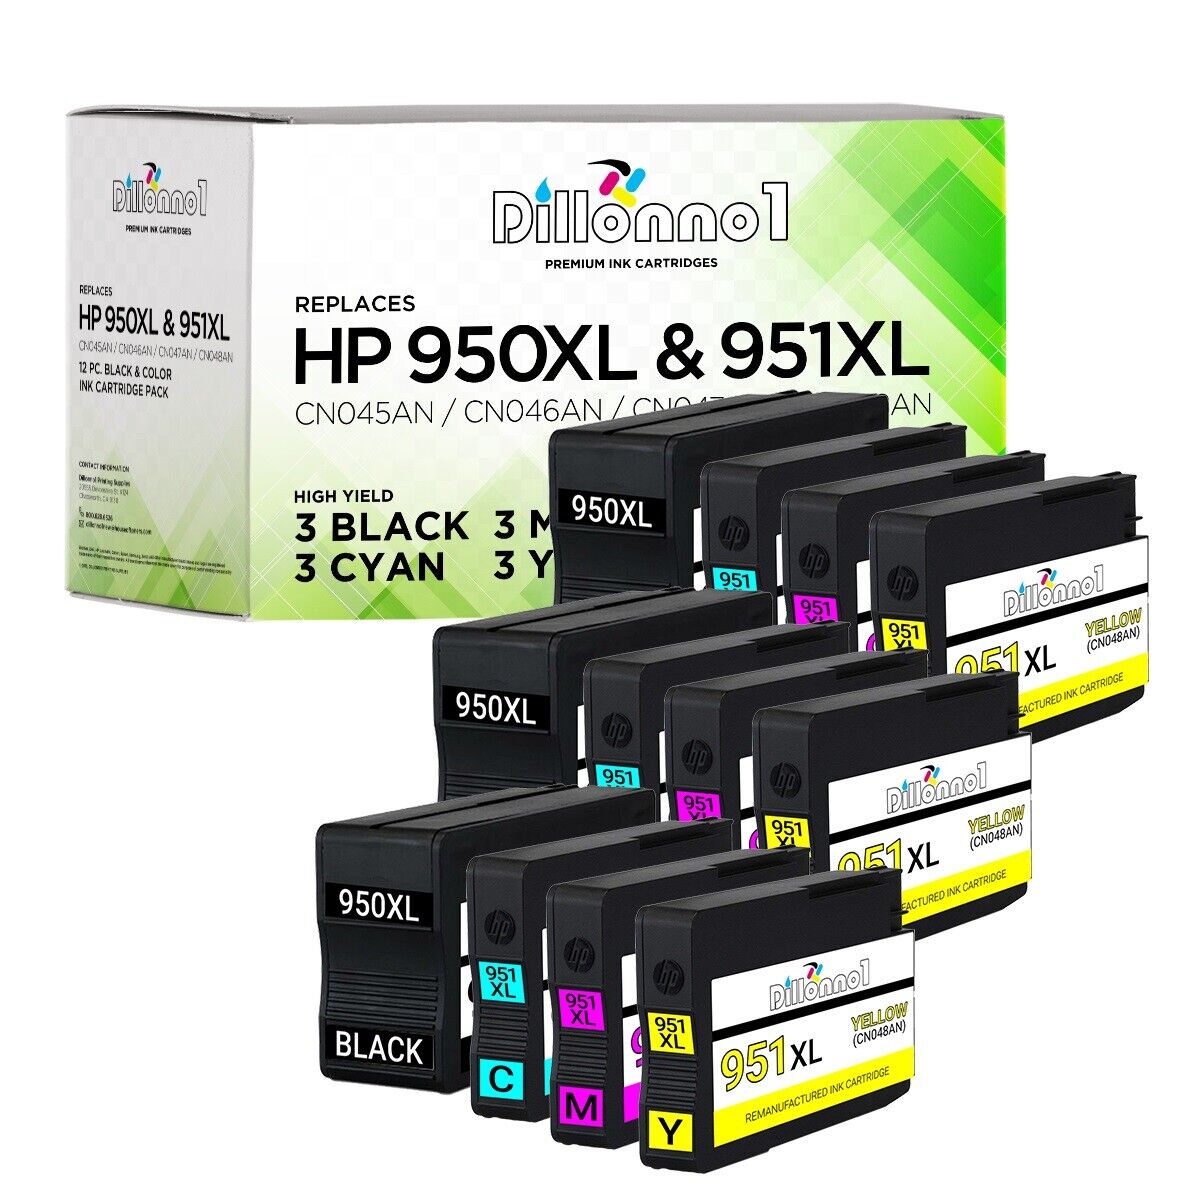 12 PACK 950XL 951 XL Ink Cartridges for HP Officejet Pro 8600 8610 8615 8620